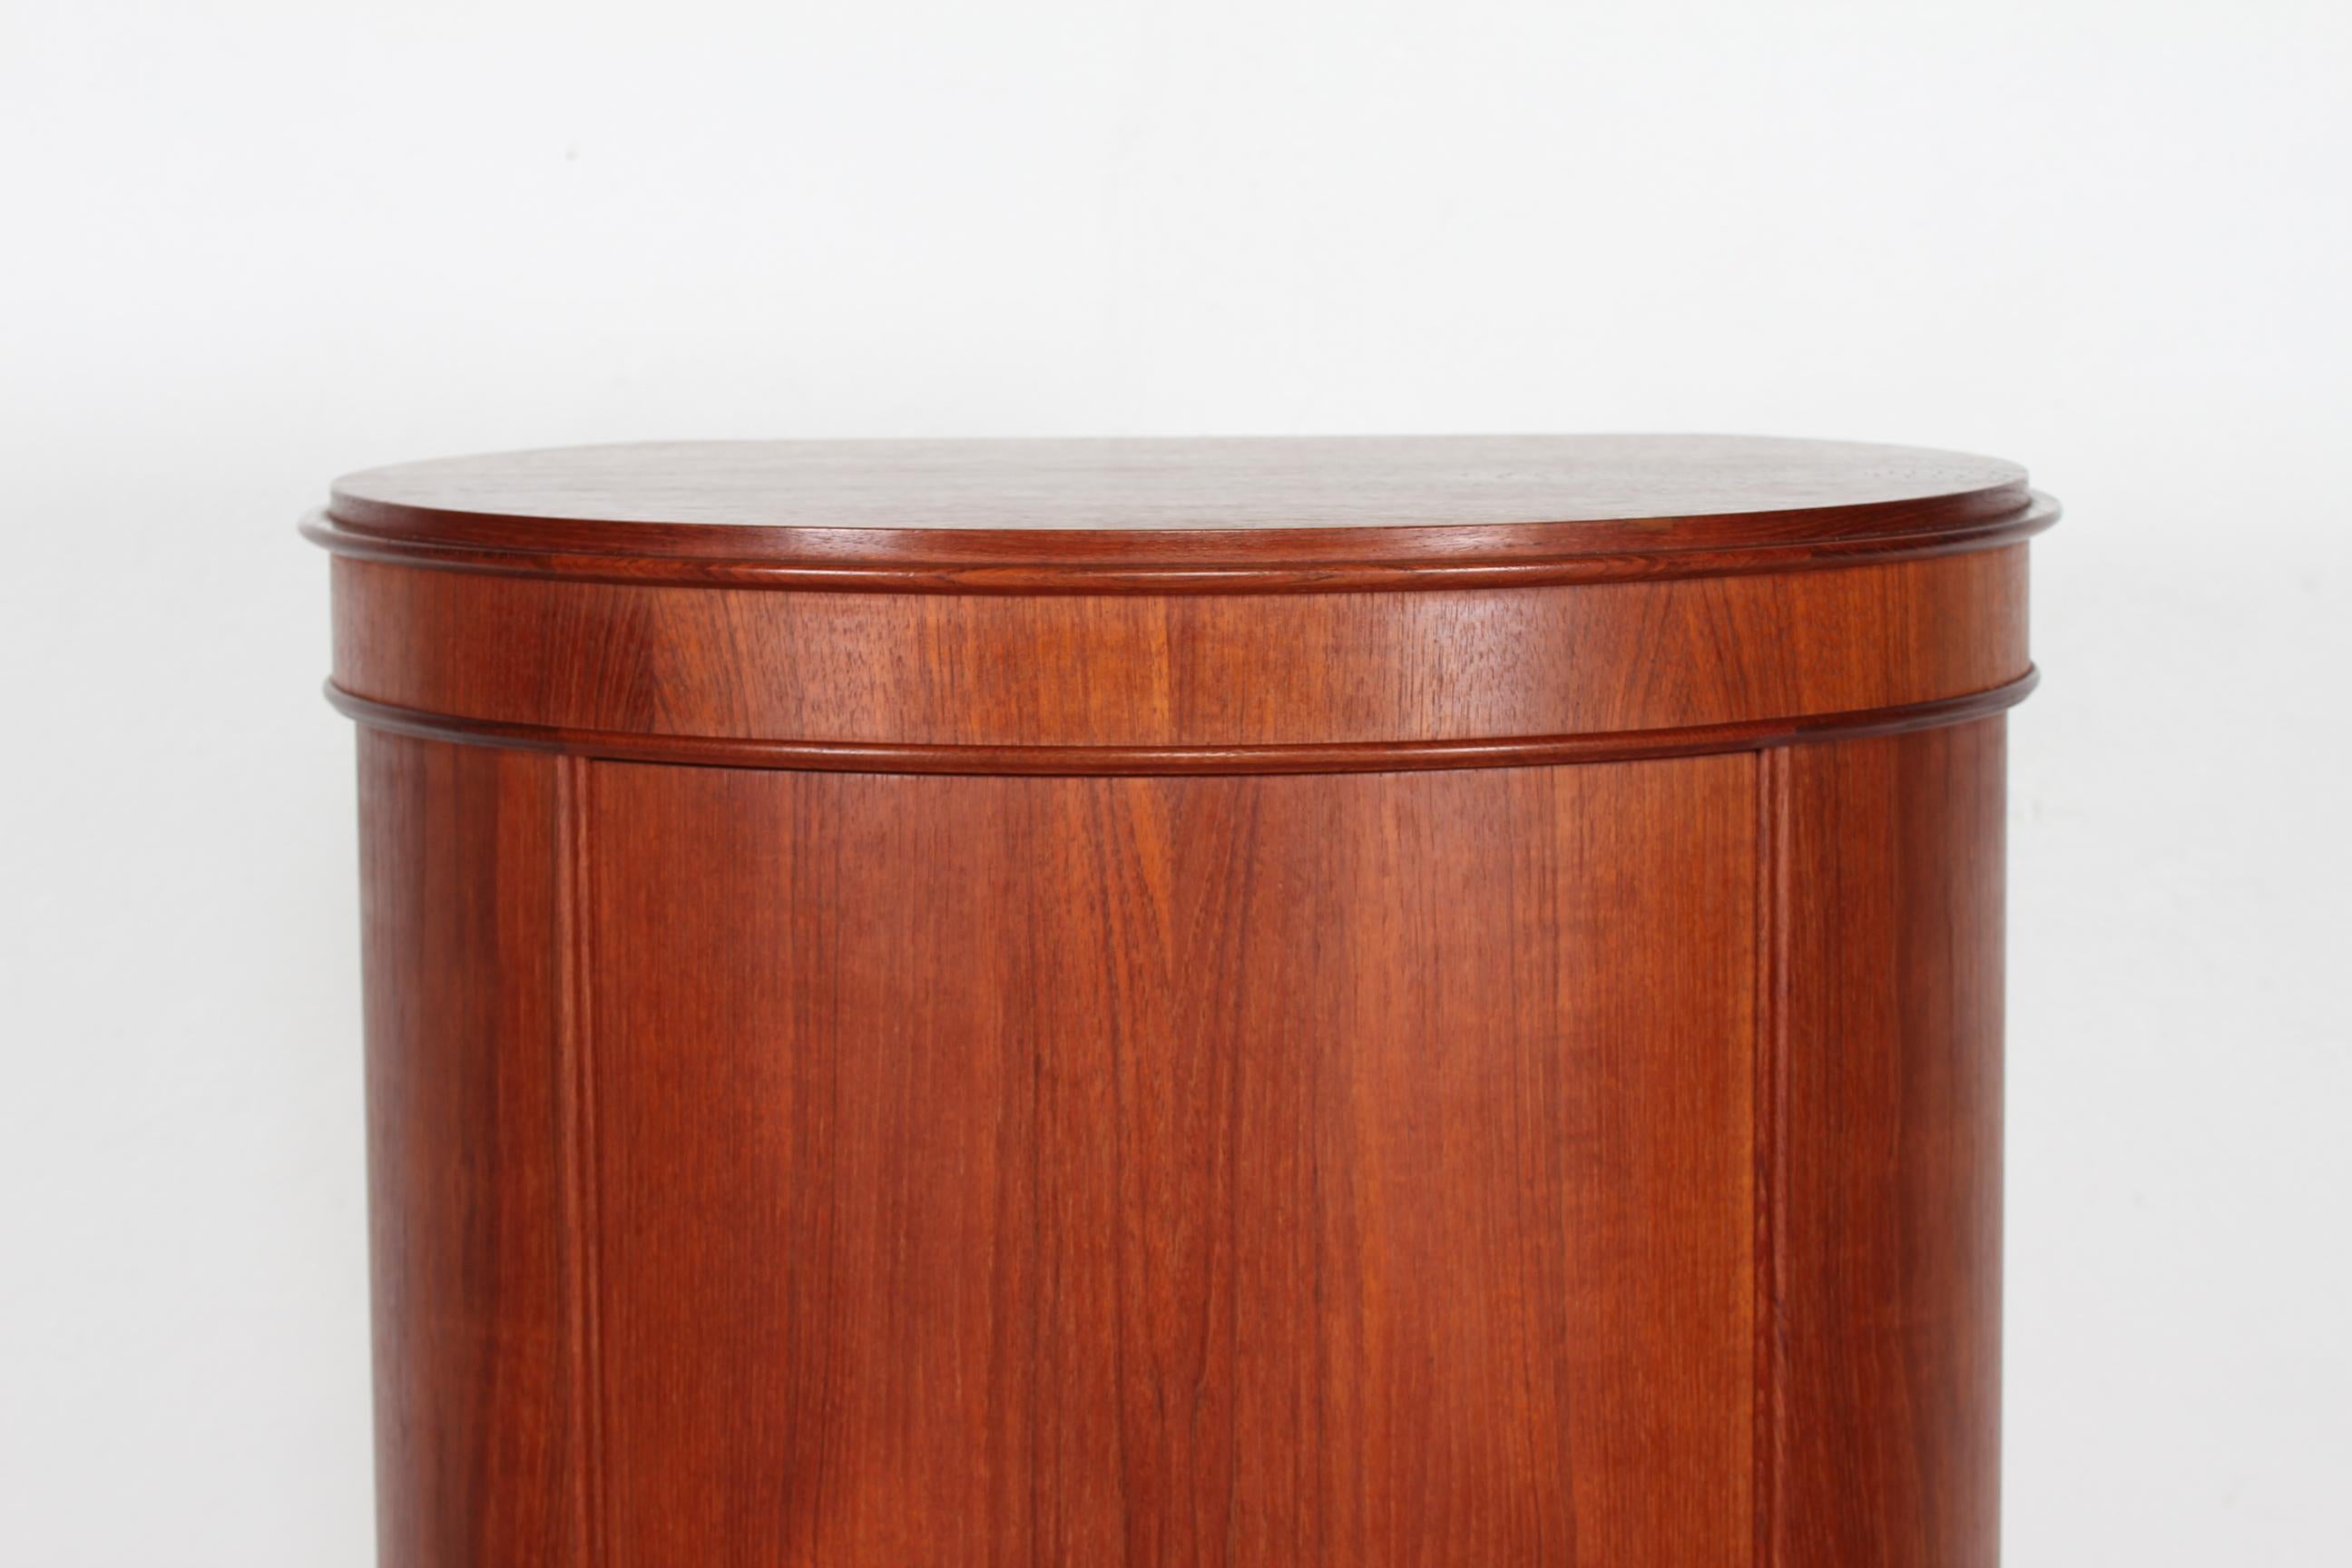 Danish modern oval pedestal cupboard with 5 shelves made of teak and teak veneer
It is designed by Danish Johannes Sorth in the 1960s

Manufacturer: Bornholms Møbelfabrik

Very nice vintage condition.
The key and lock are with full